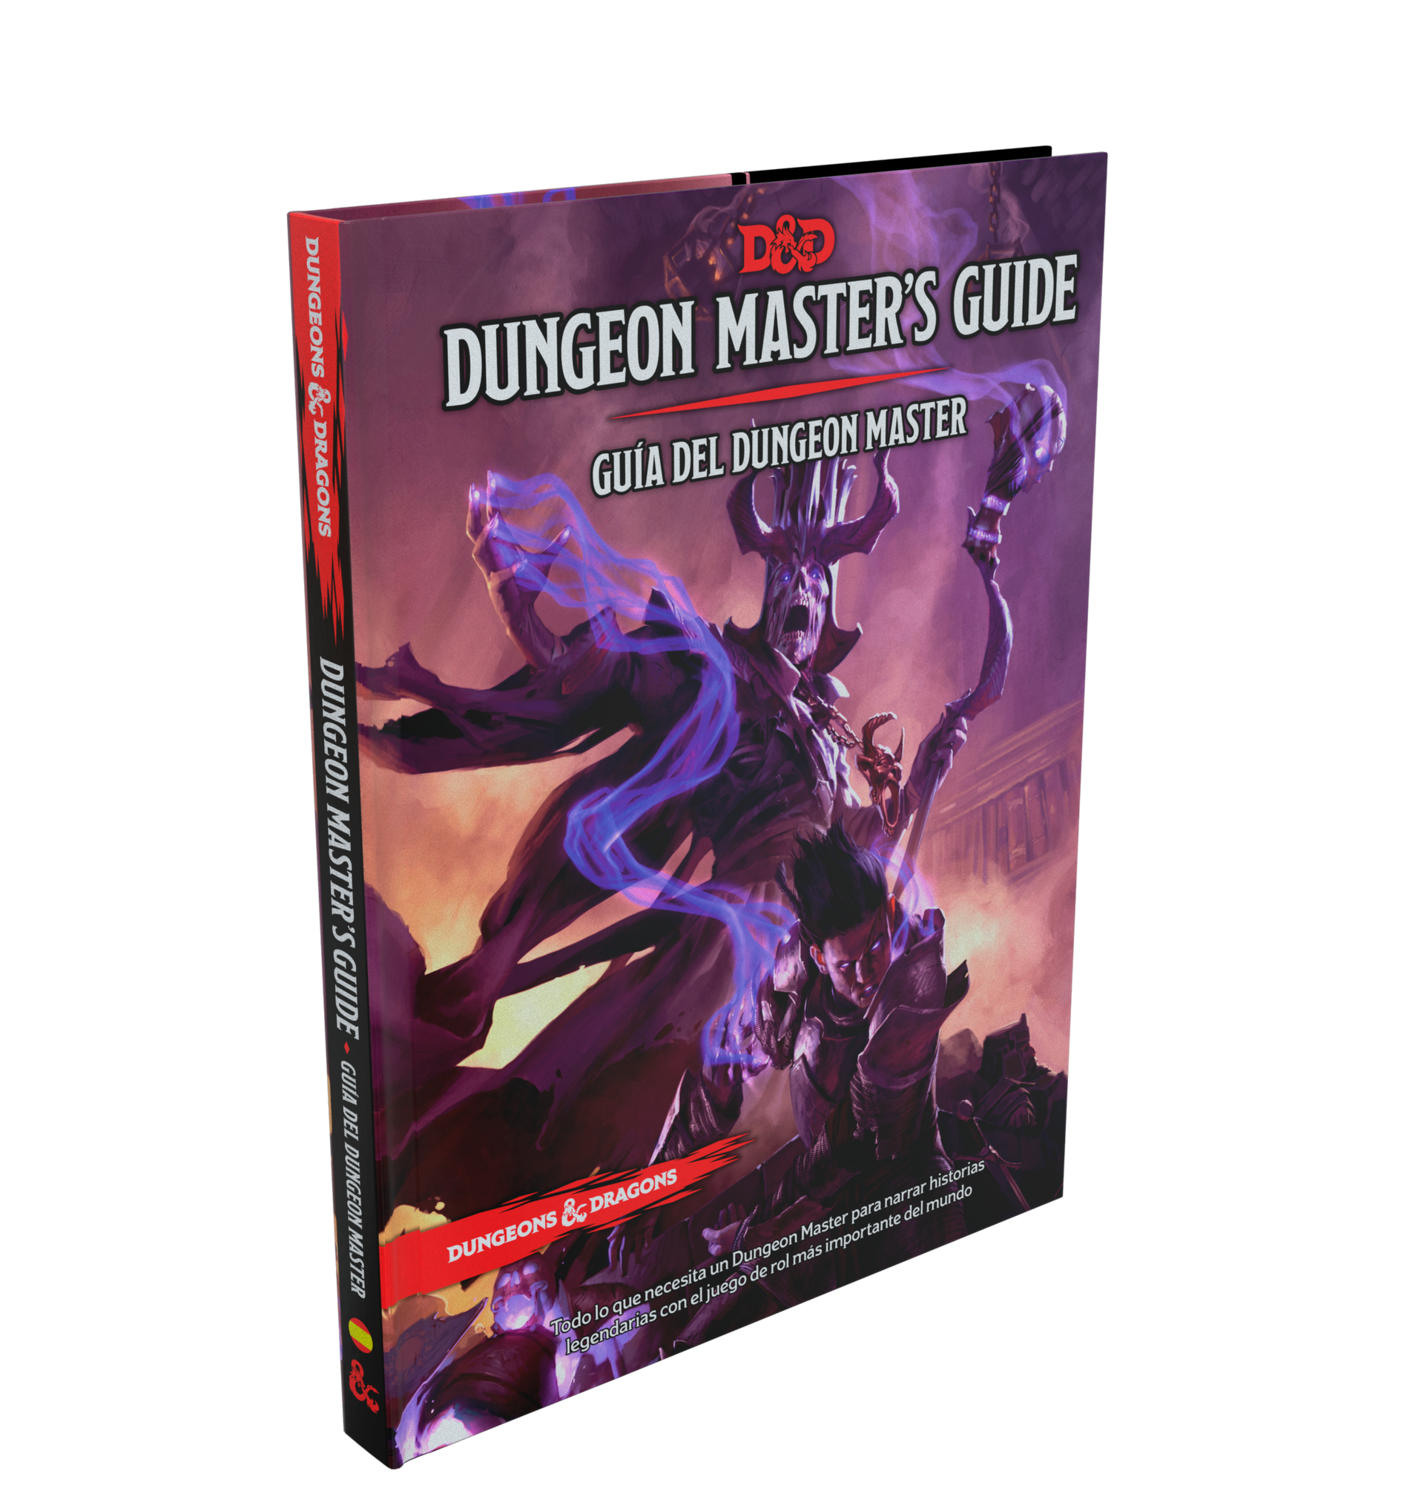 D&D Dungeon Master's Guide (Guía del DM) (Dungeon and Dragons)